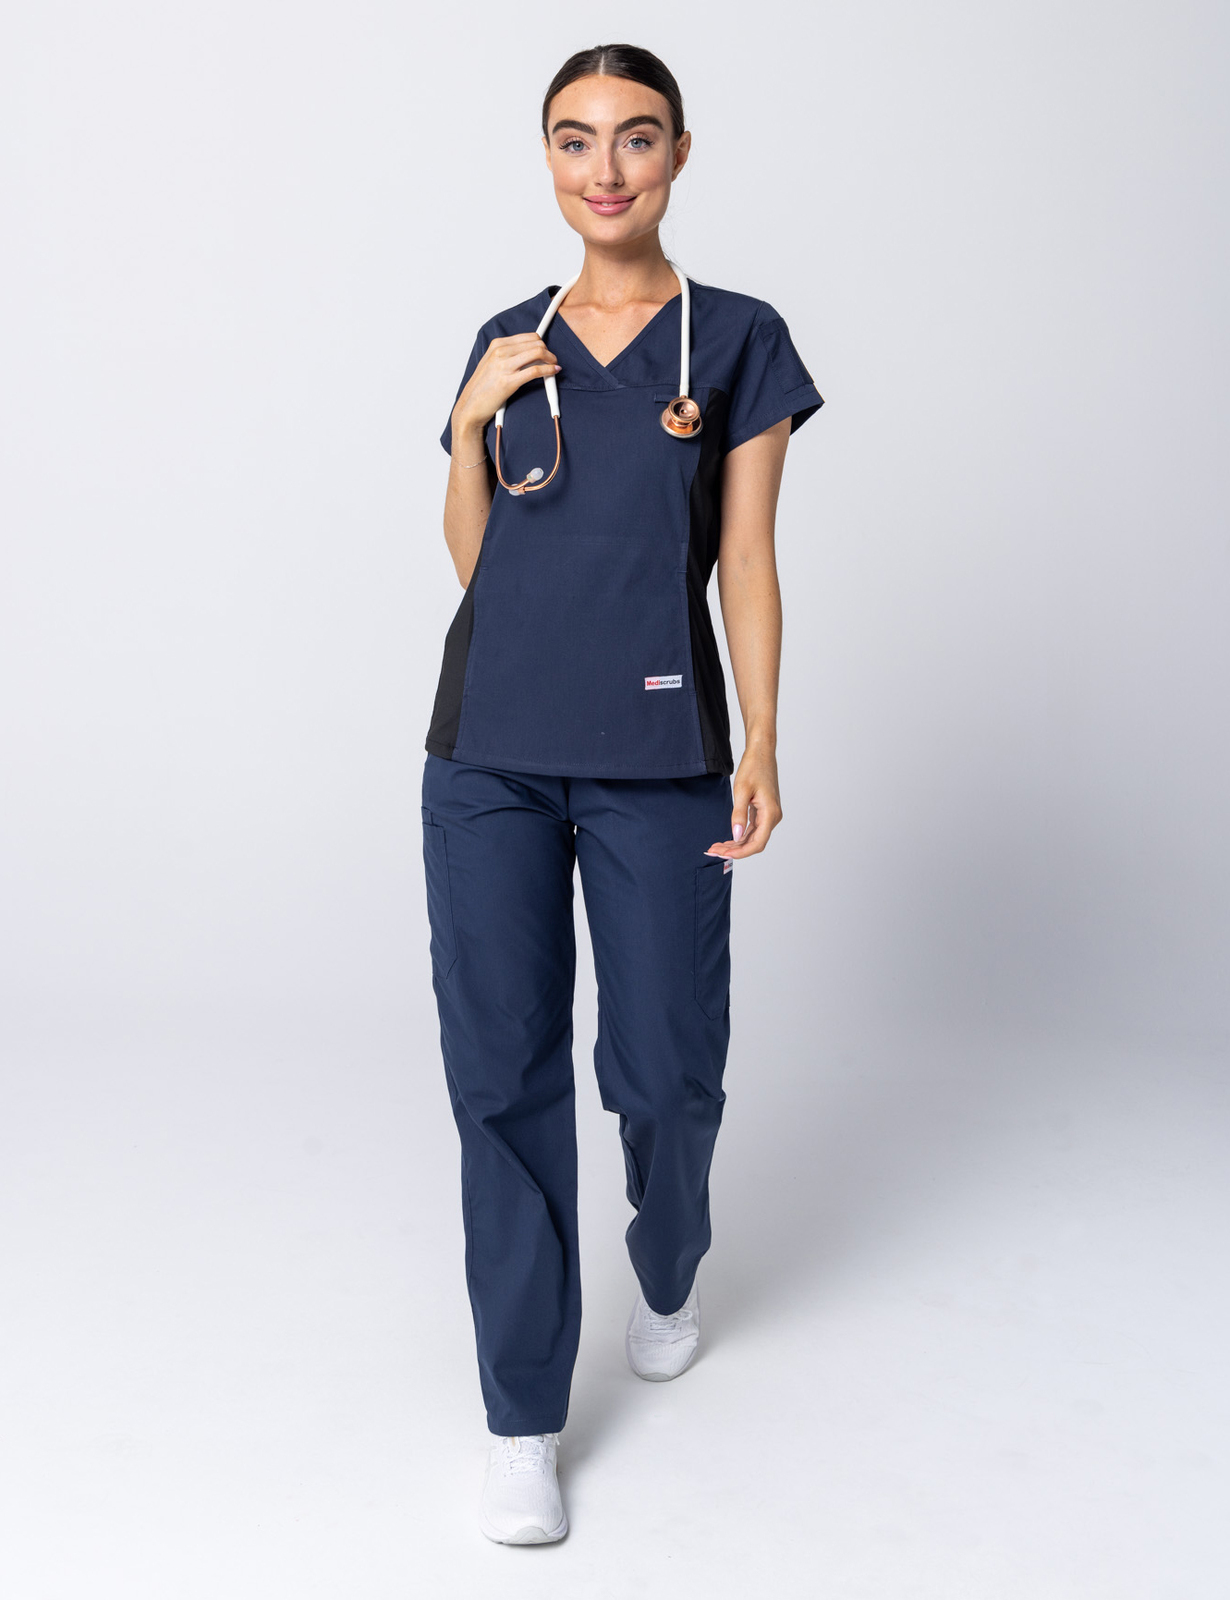 Women's Fit Solid Scrub Top With Spandex Panel - Navy - Small